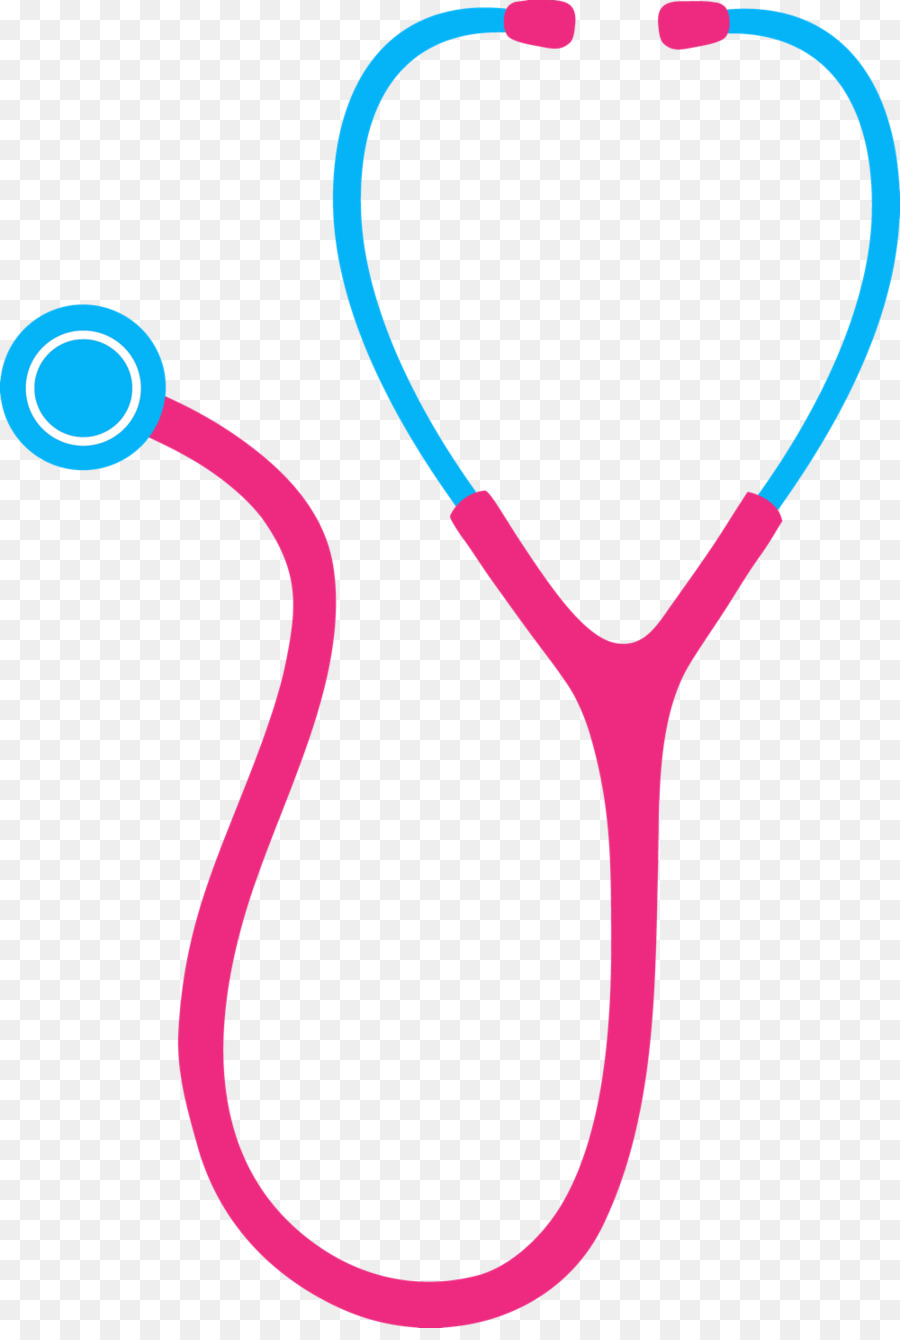 Physician Stethoscope Medicine Health Care Clip art - nurses clipart png download - 1000*1475 - Free Transparent Physician png Download.